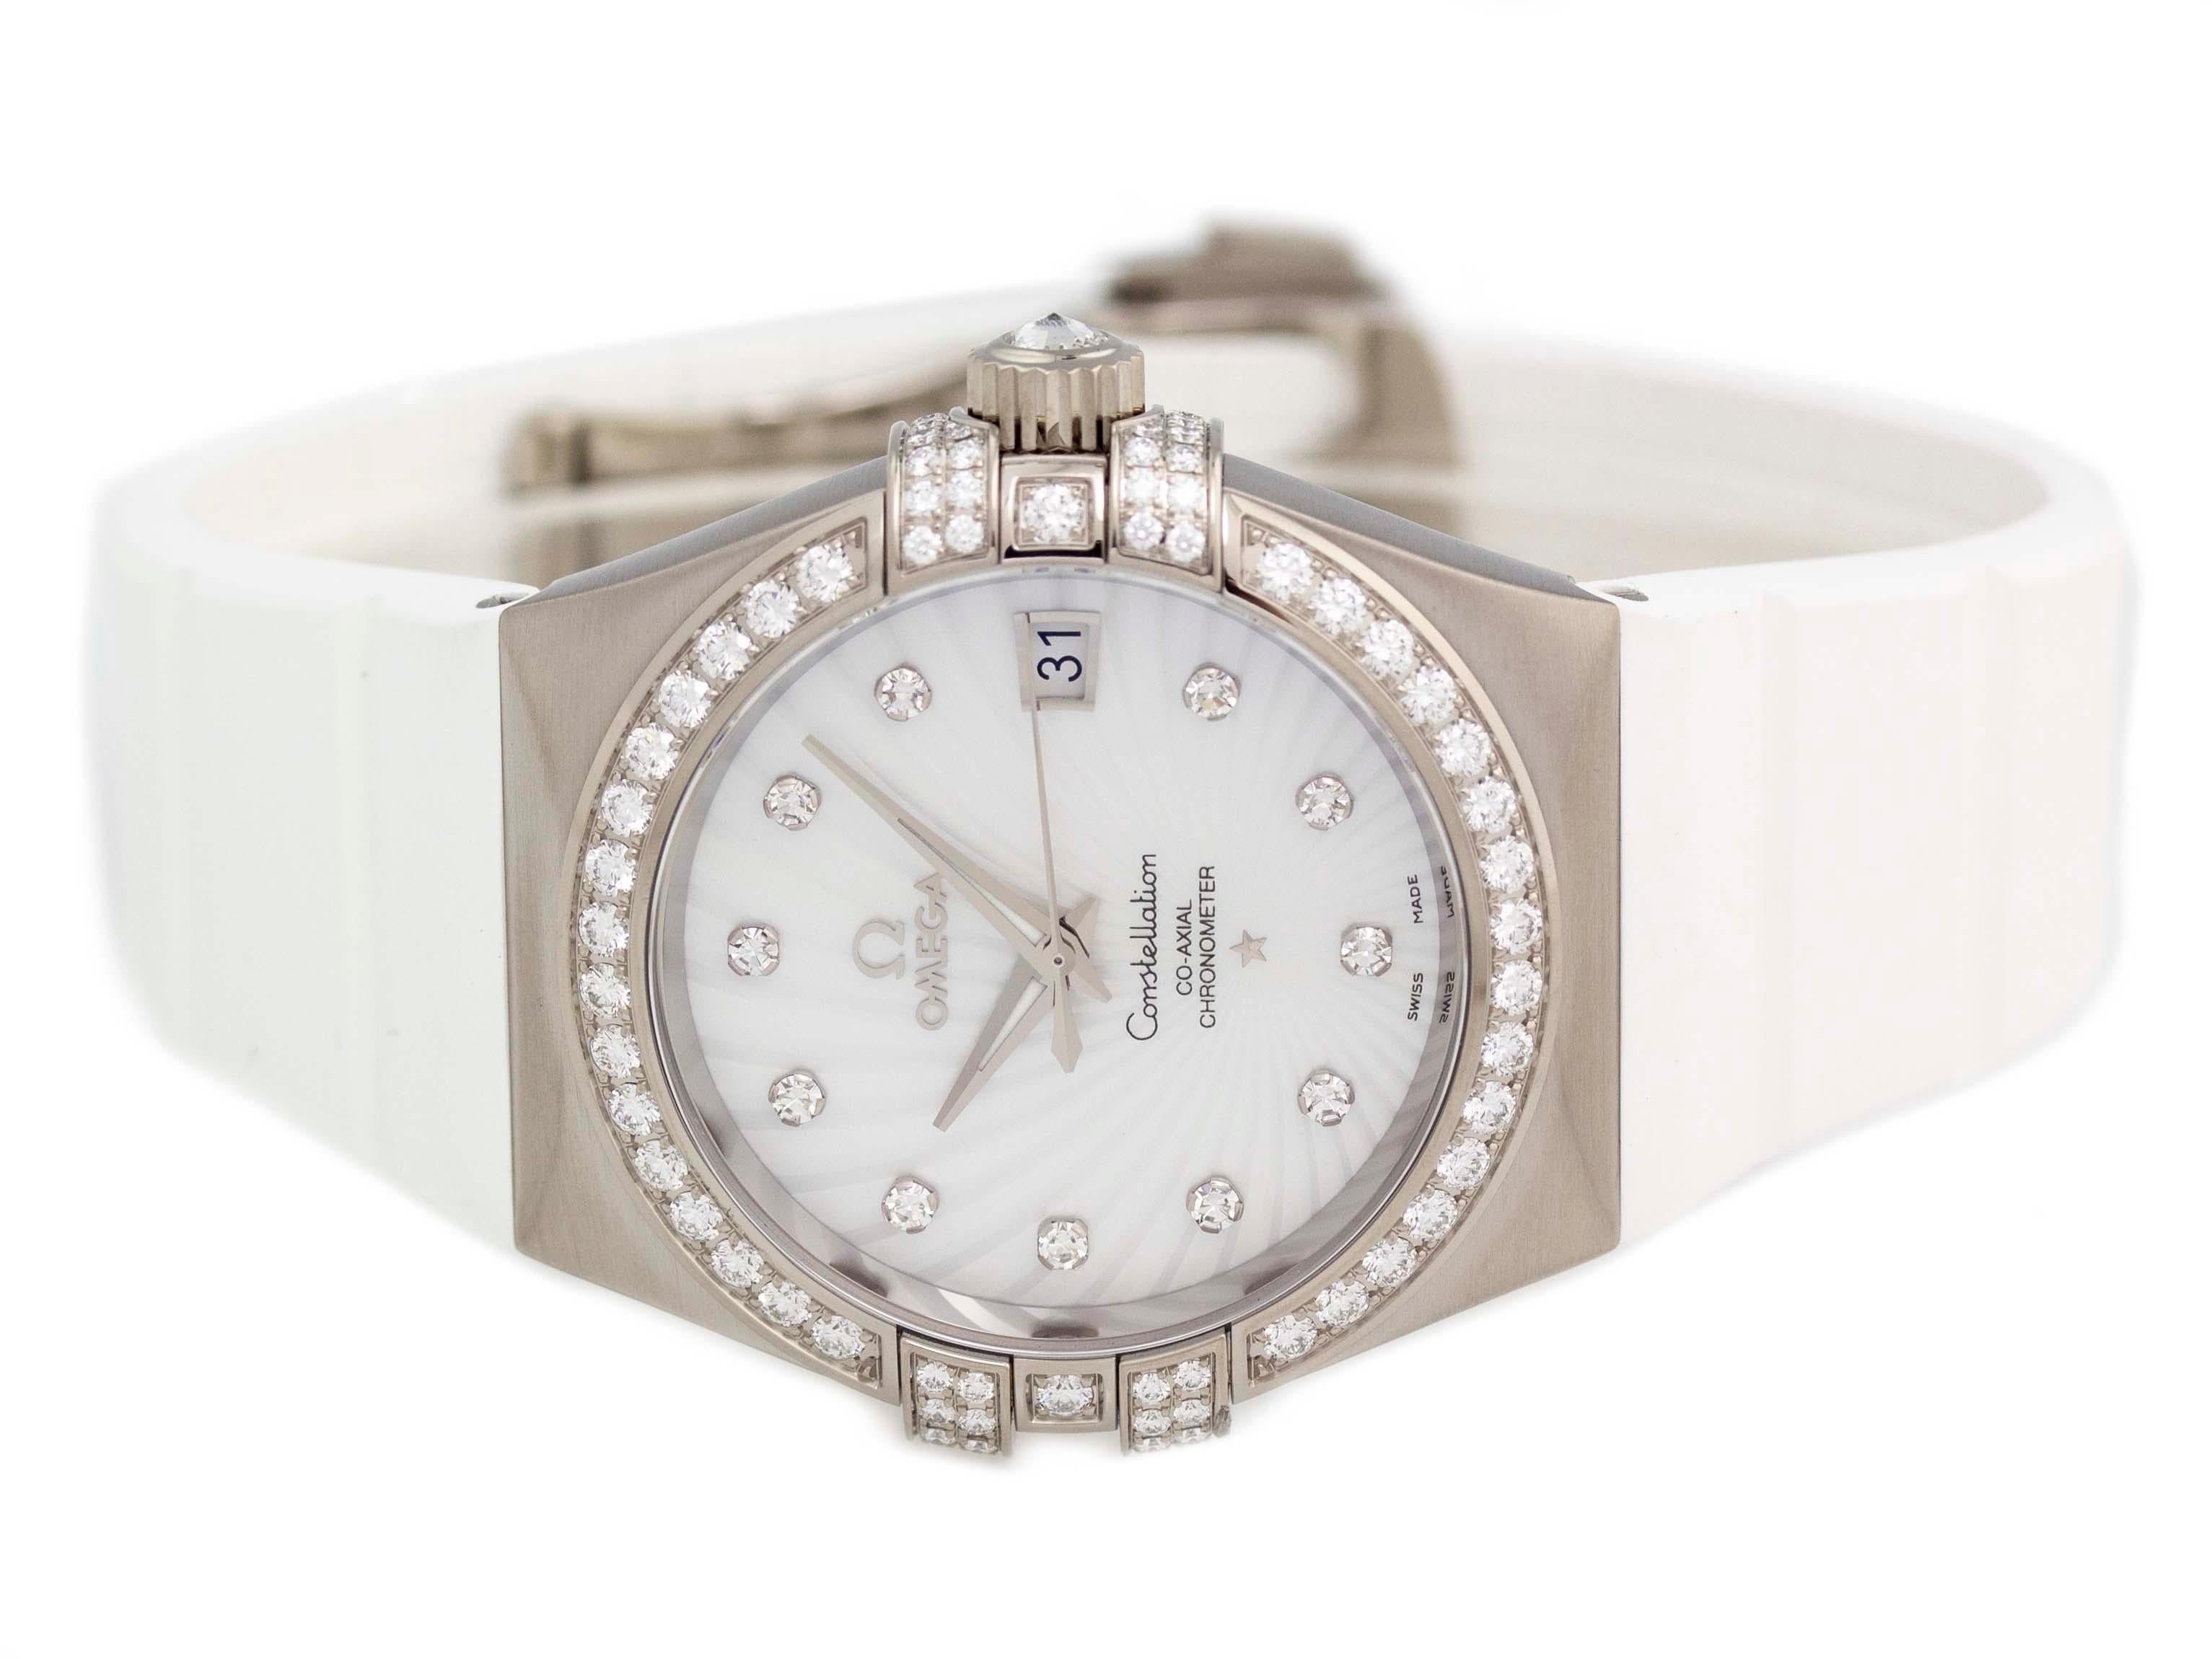 Brand	Omega
Series	Constellation Co-Axial
Model	123.57.35.20.55.005
Gender	Ladies
Condition	Excellent Display Model
Material	18k White Gold
Finish	Brushed
Caseback	Transparent
Diameter	35mm
Thickness	 11mm
Bezel	Diamond Set
Crystal	Anti-Reflective